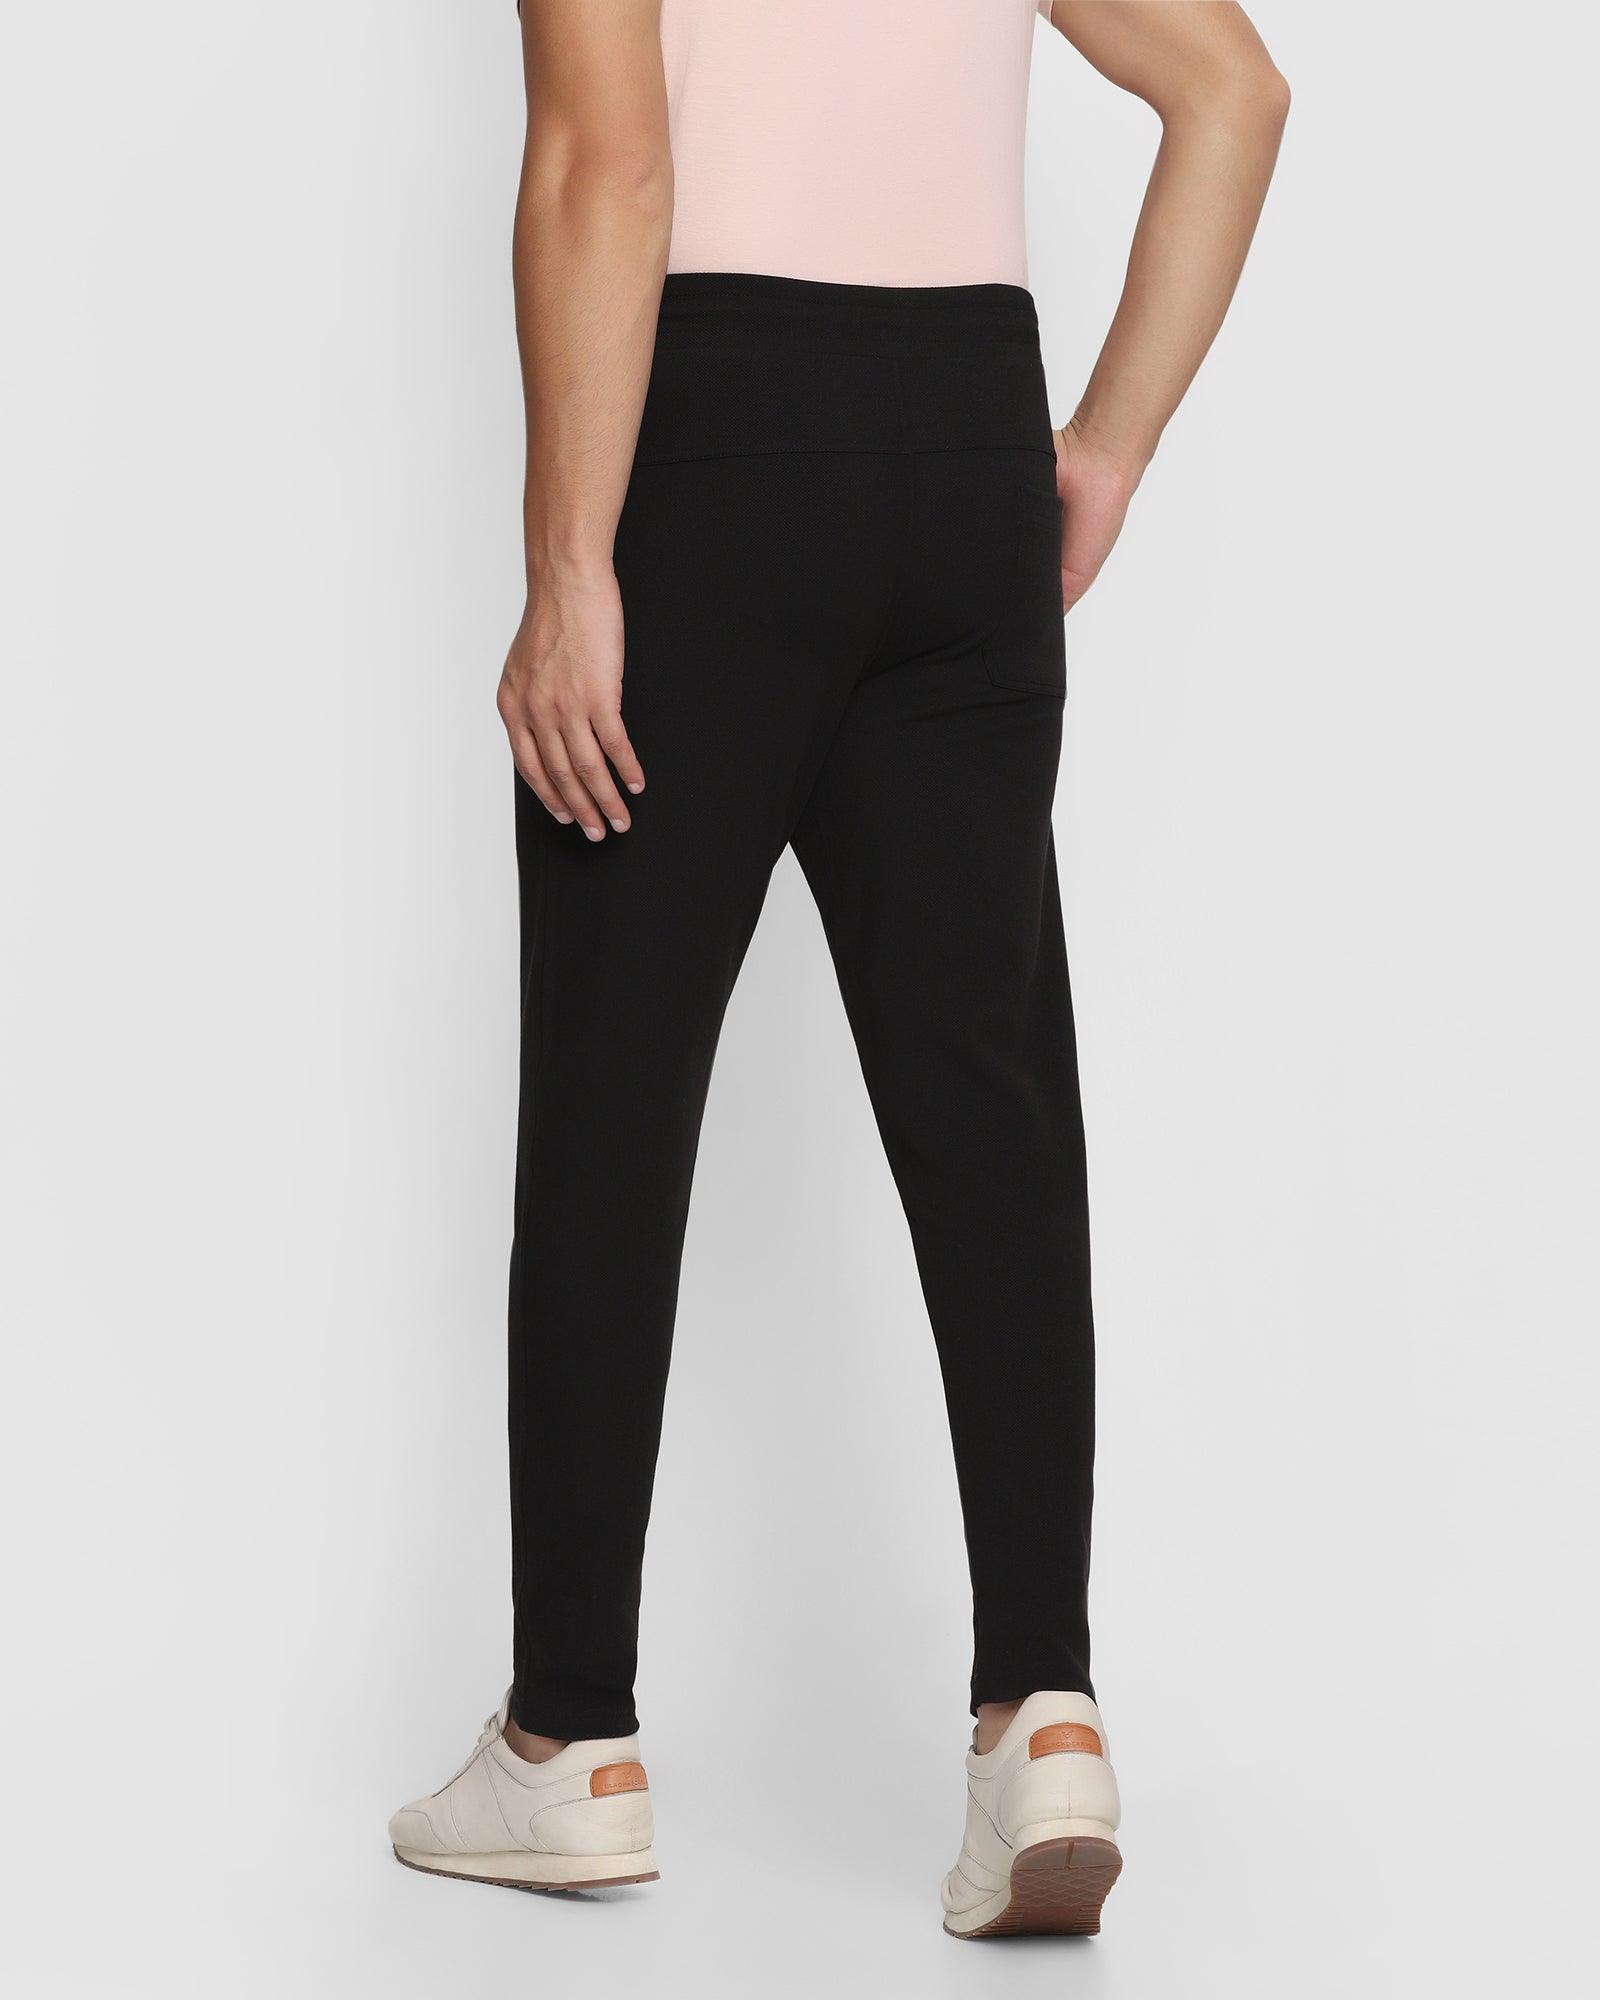 Buy New North Relaxed Fit Jogger Pants for Women Black-XS at Amazon.in